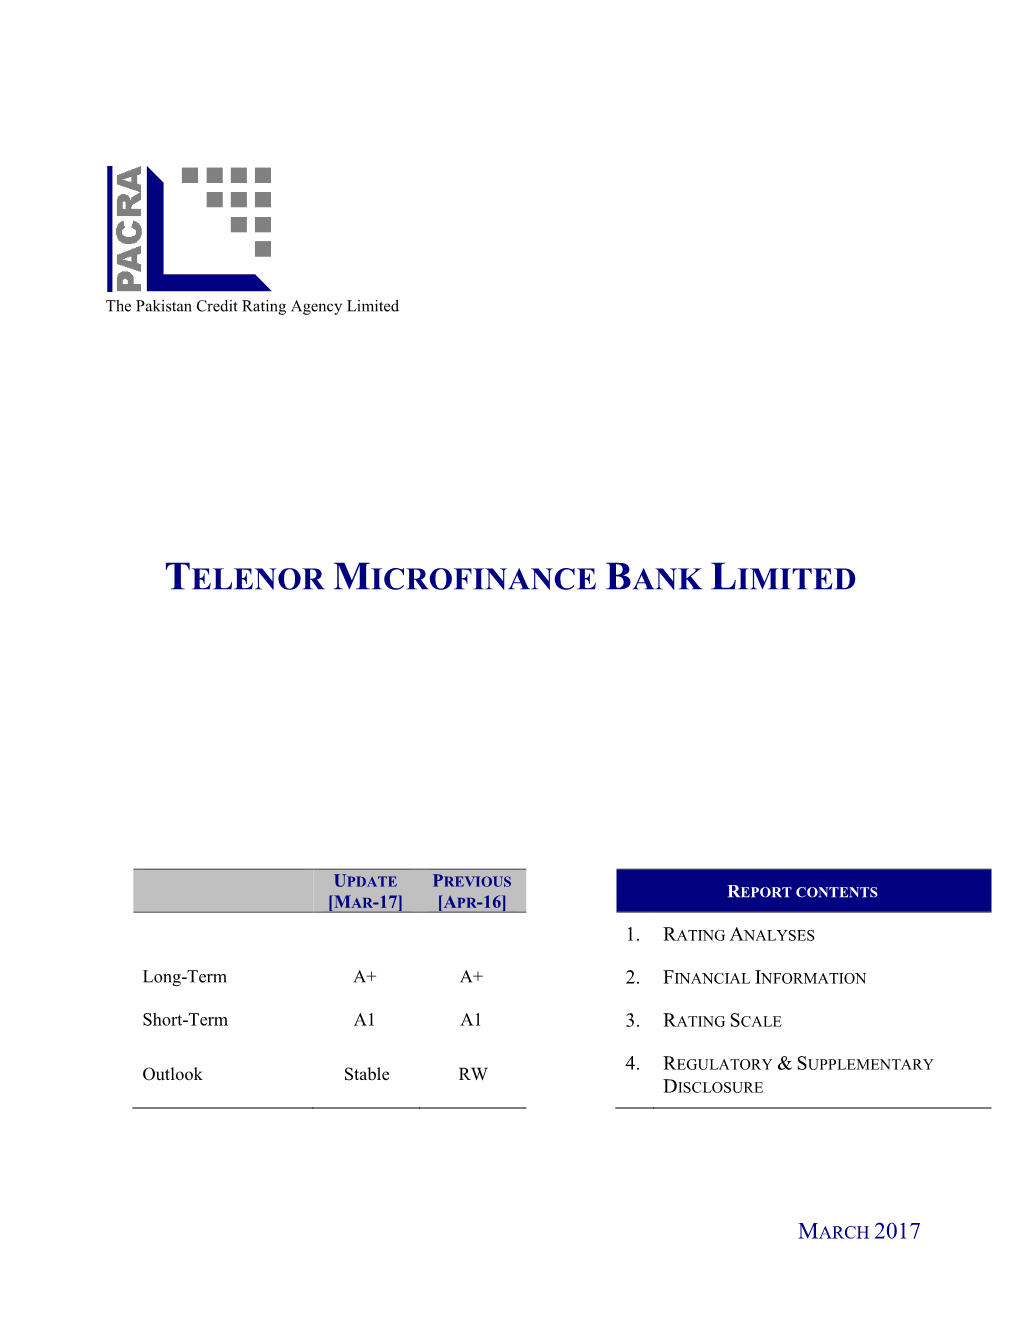 Telenor Microfinance Bank Limited Reflect Strong Business